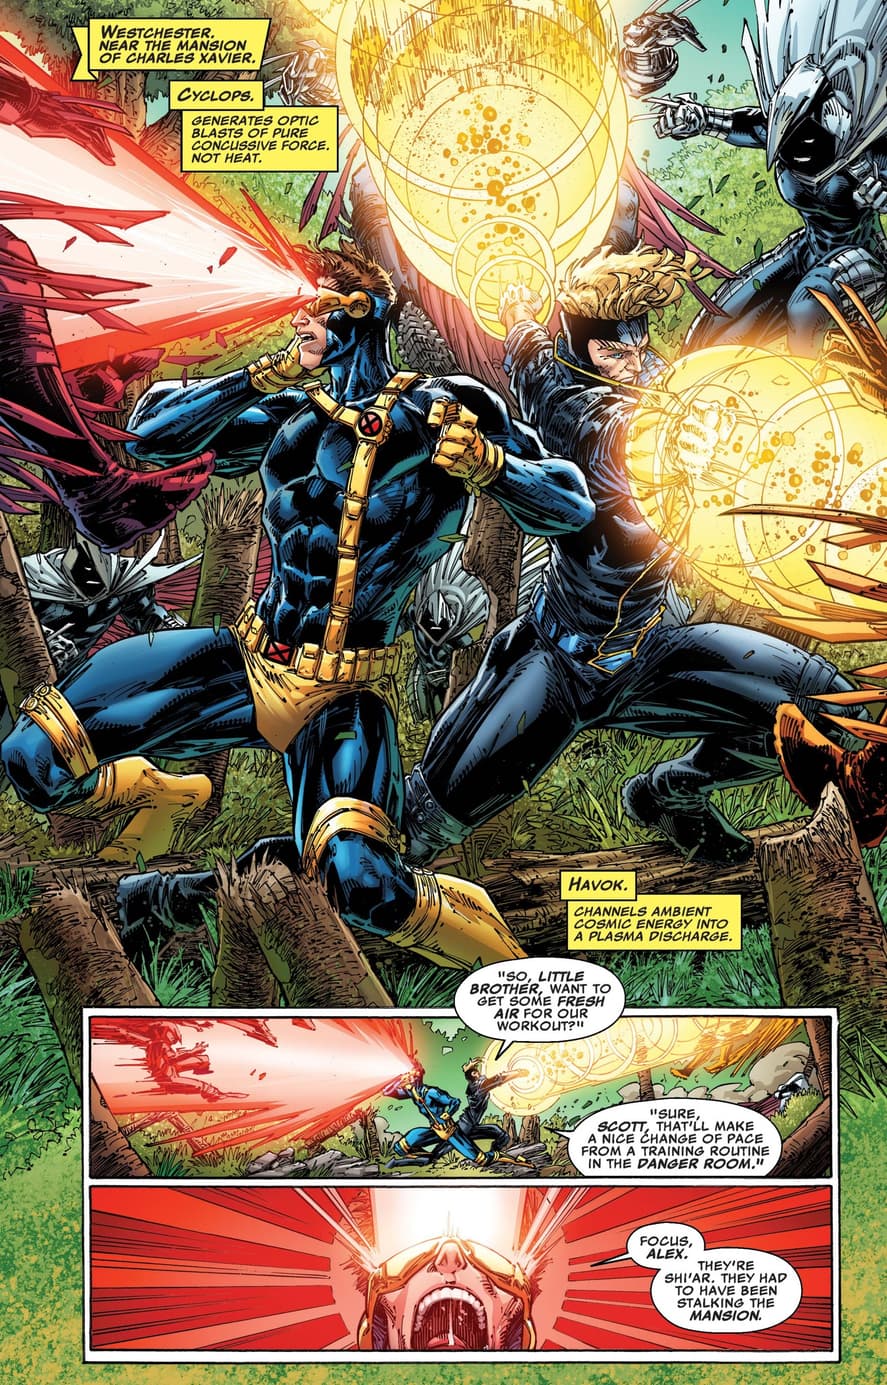 Cyclops and Havok team-up against the Shi'ar.